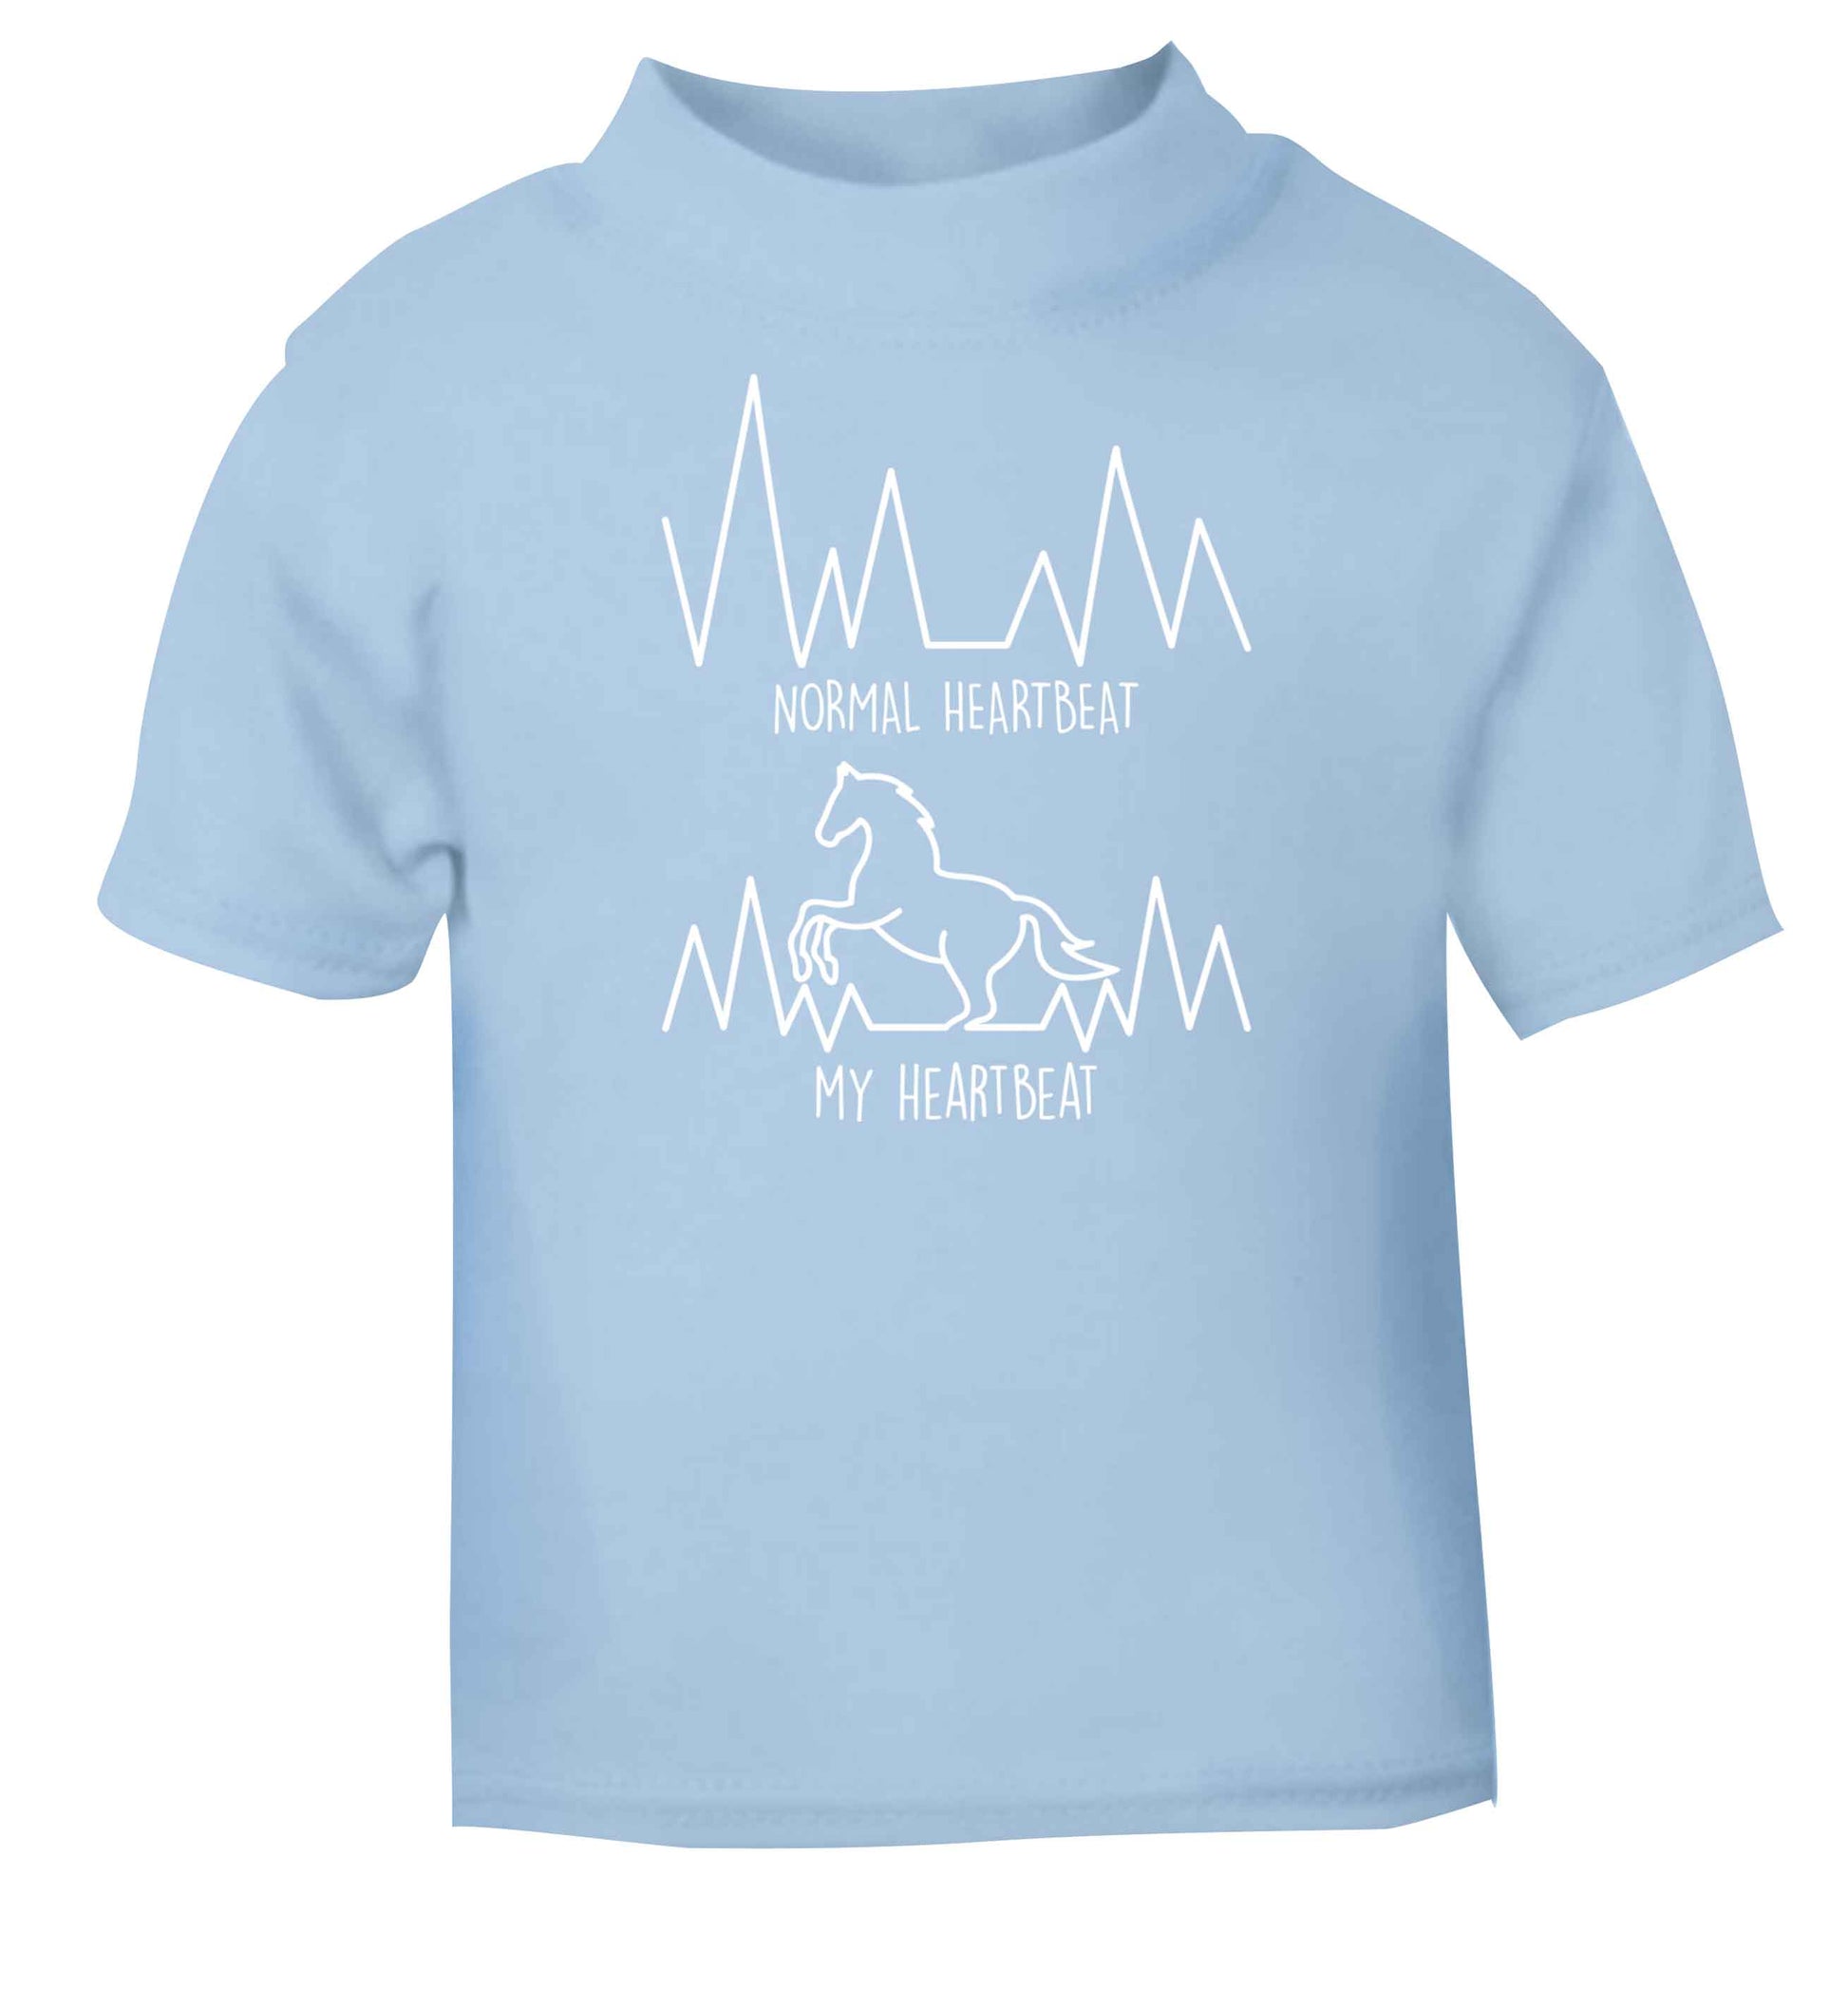 Horse - Normal heartbeat my heartbeat light blue baby toddler Tshirt 2 Years